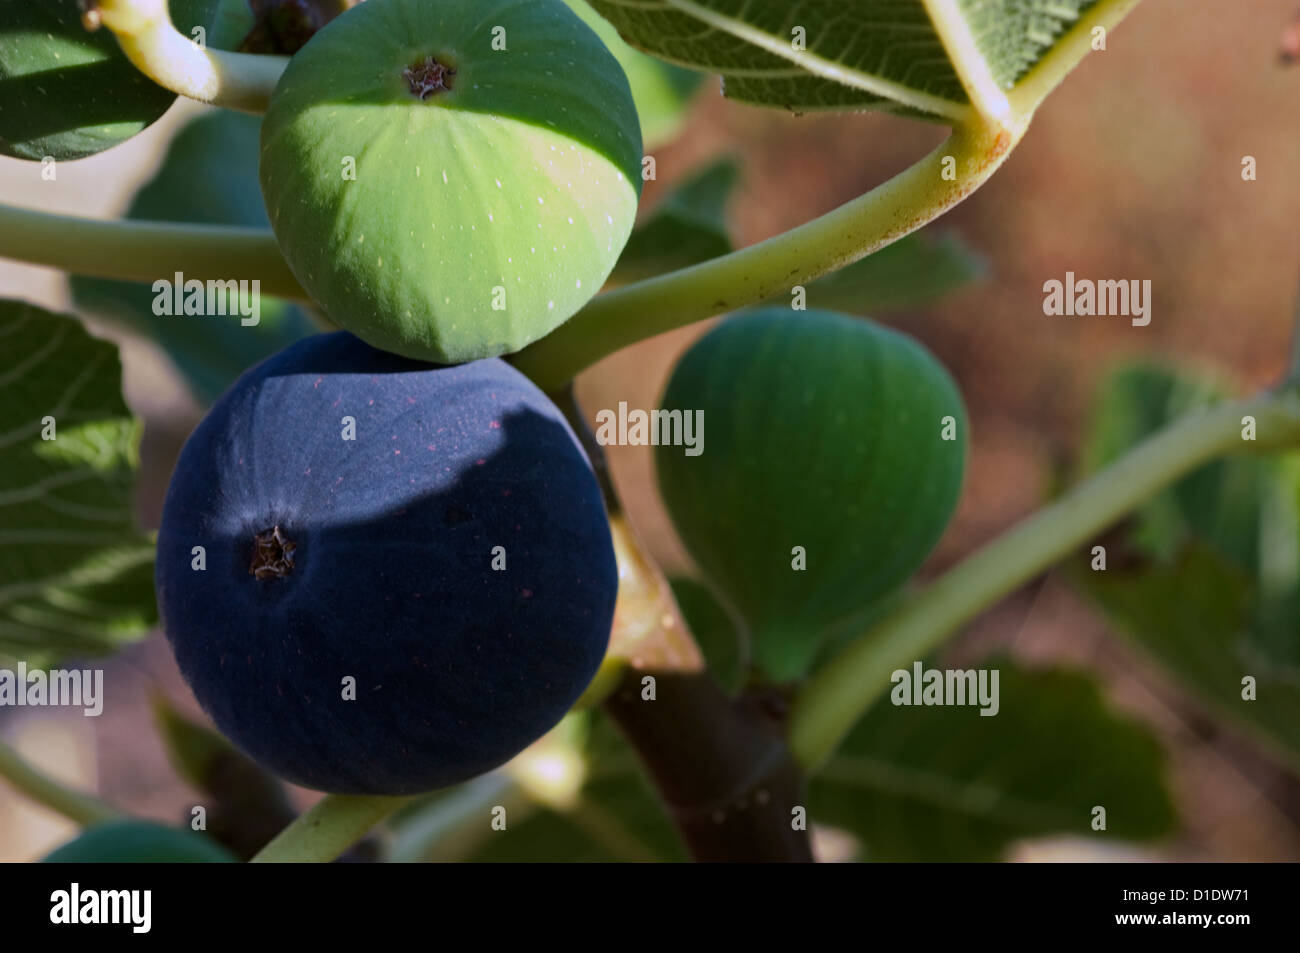 Green and blue figs on the tree (Ficus carica) Stock Photo